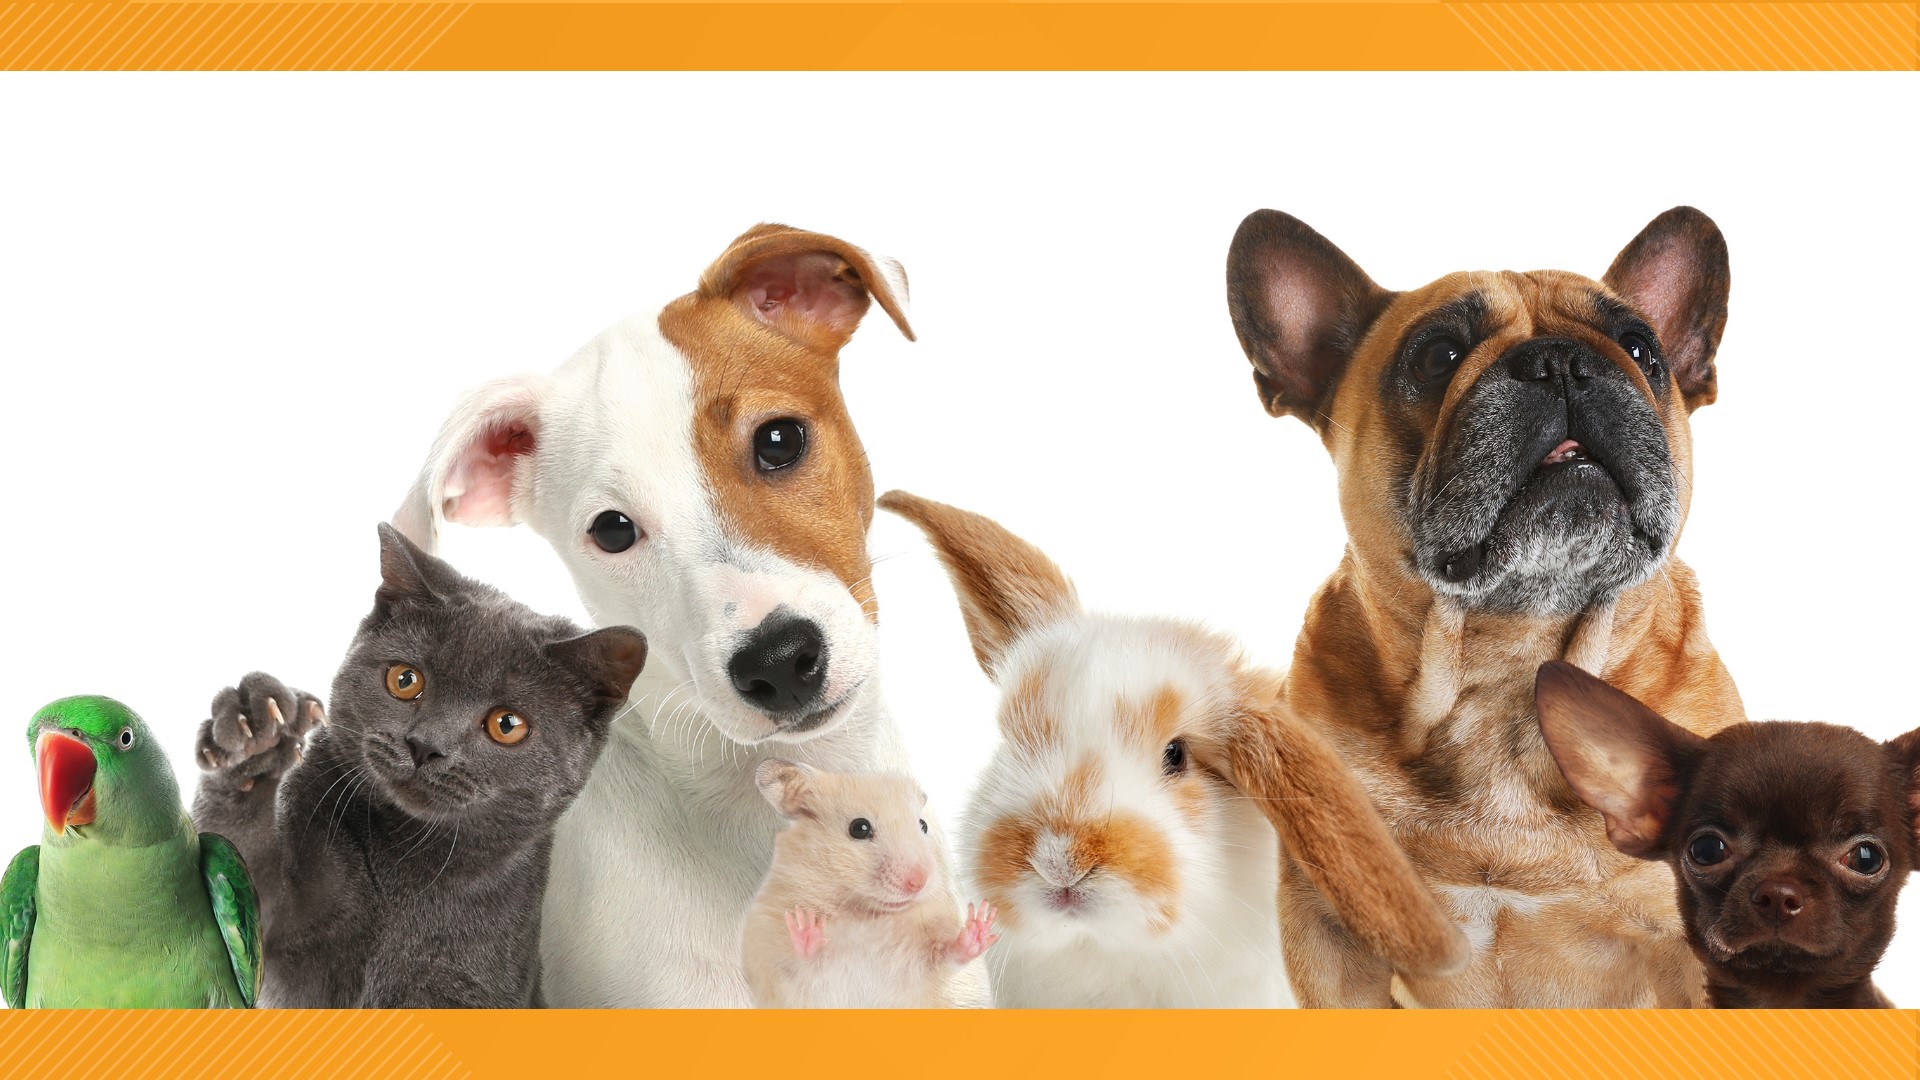 In celebration of National Pet Day, the SPCA serving Erie County is hosting a recycling event Thursday, April 11.